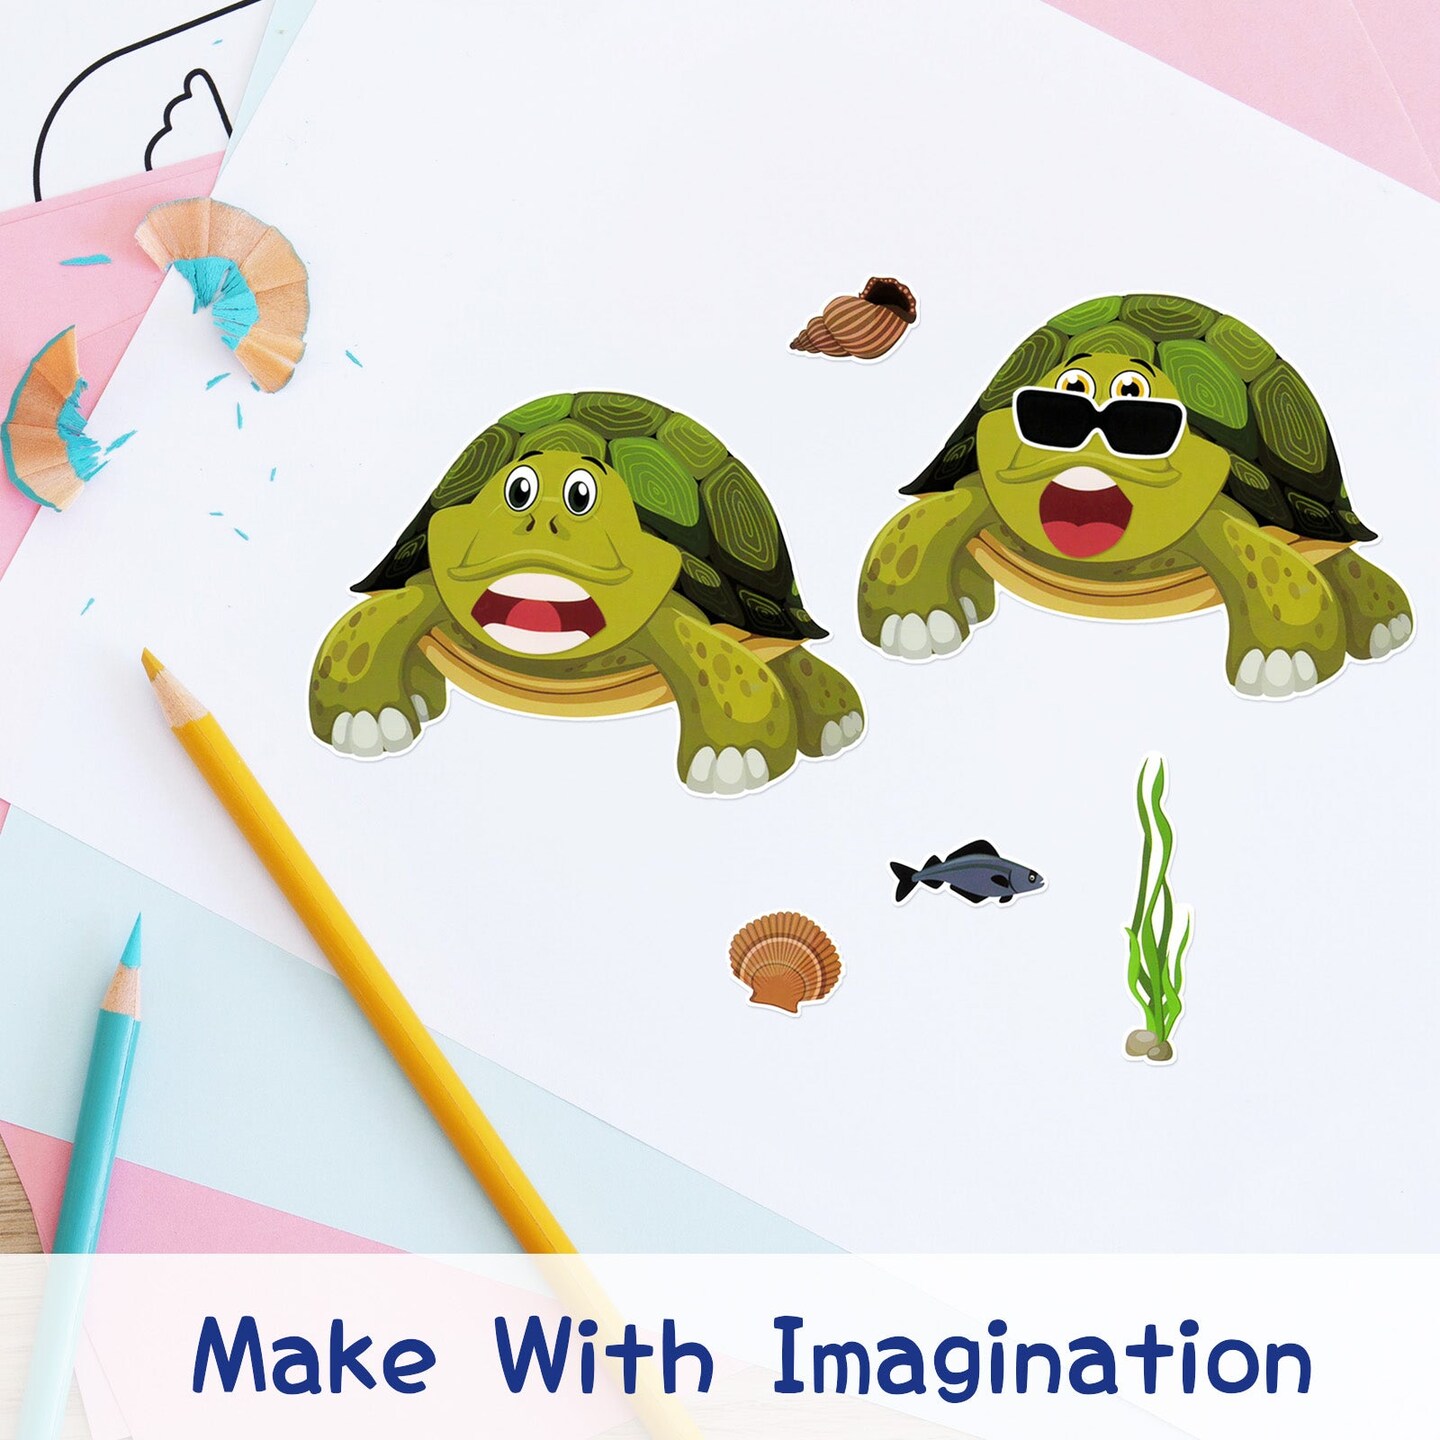 Wrapables Make Your Own Sticker Sheets, DIY Make A Face Animal, Food, Party Favor Stickers (24 Sheets) Dinosaurs